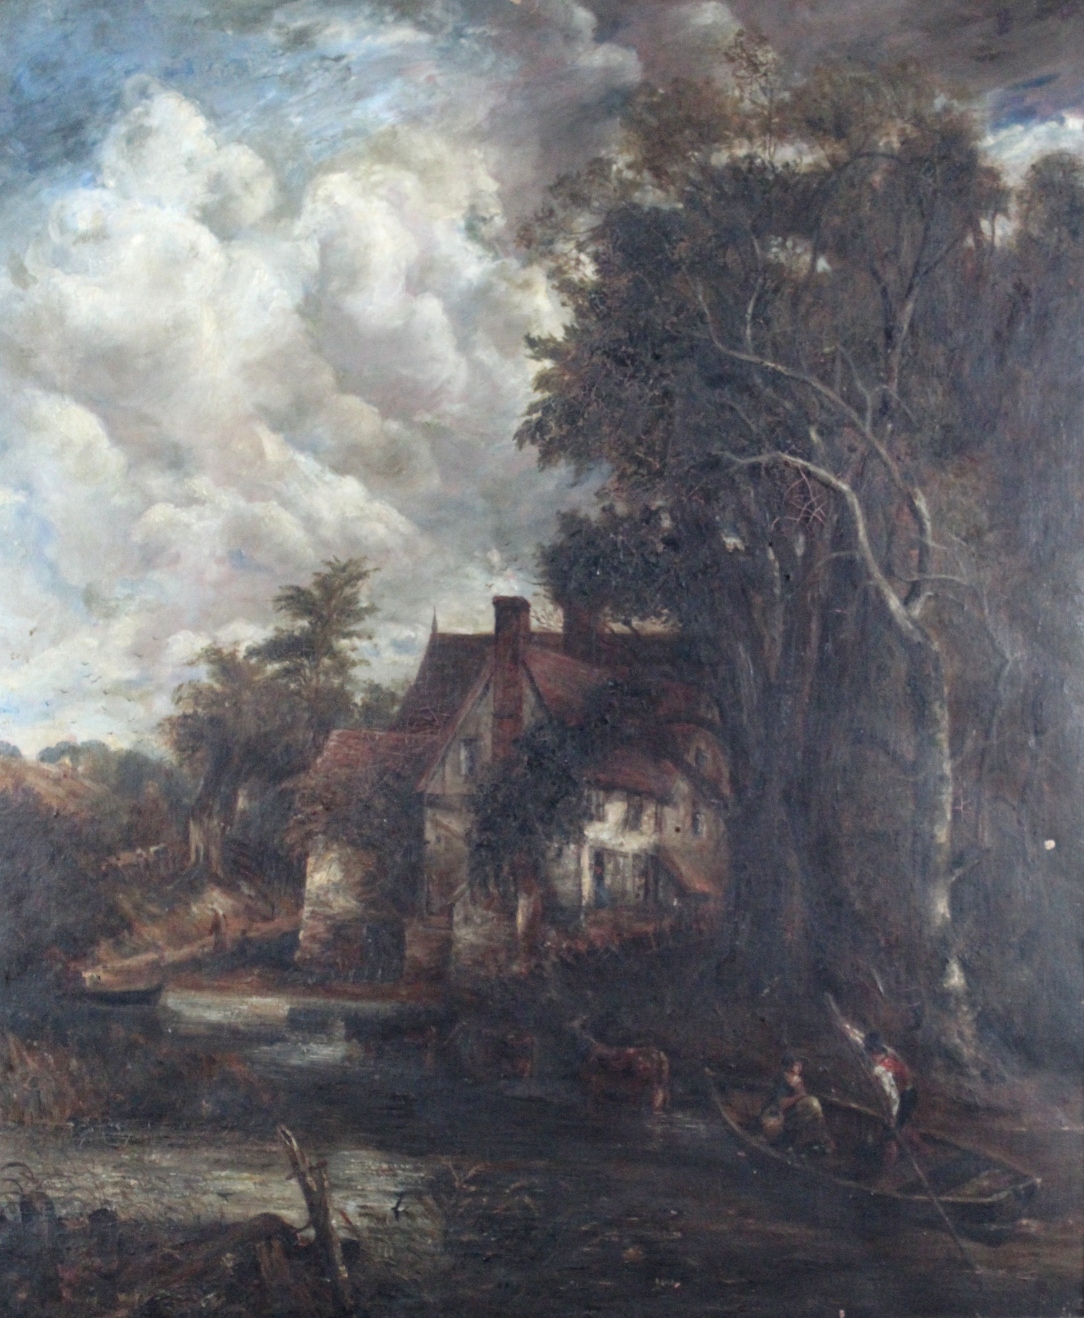 AFTER JOHN CONSTABLE, RA (1776-1837) THE VALLEY FARM Copy by P. Wills Harley, c.1900-1920, oil on